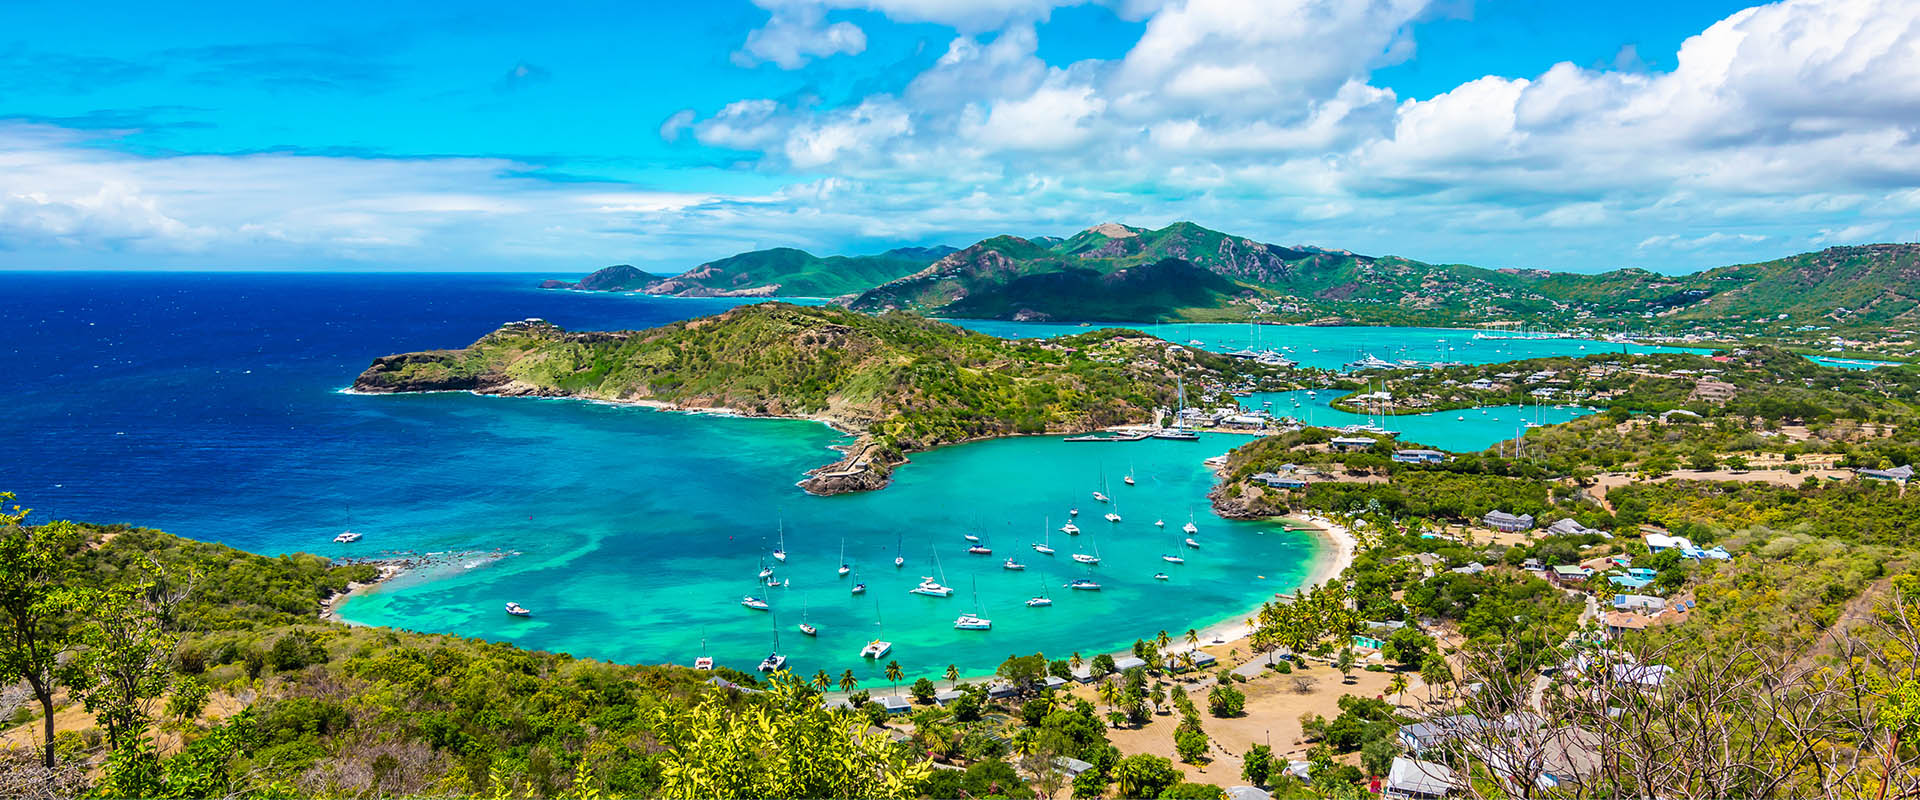 Discover the Grenadines & Windwards islands